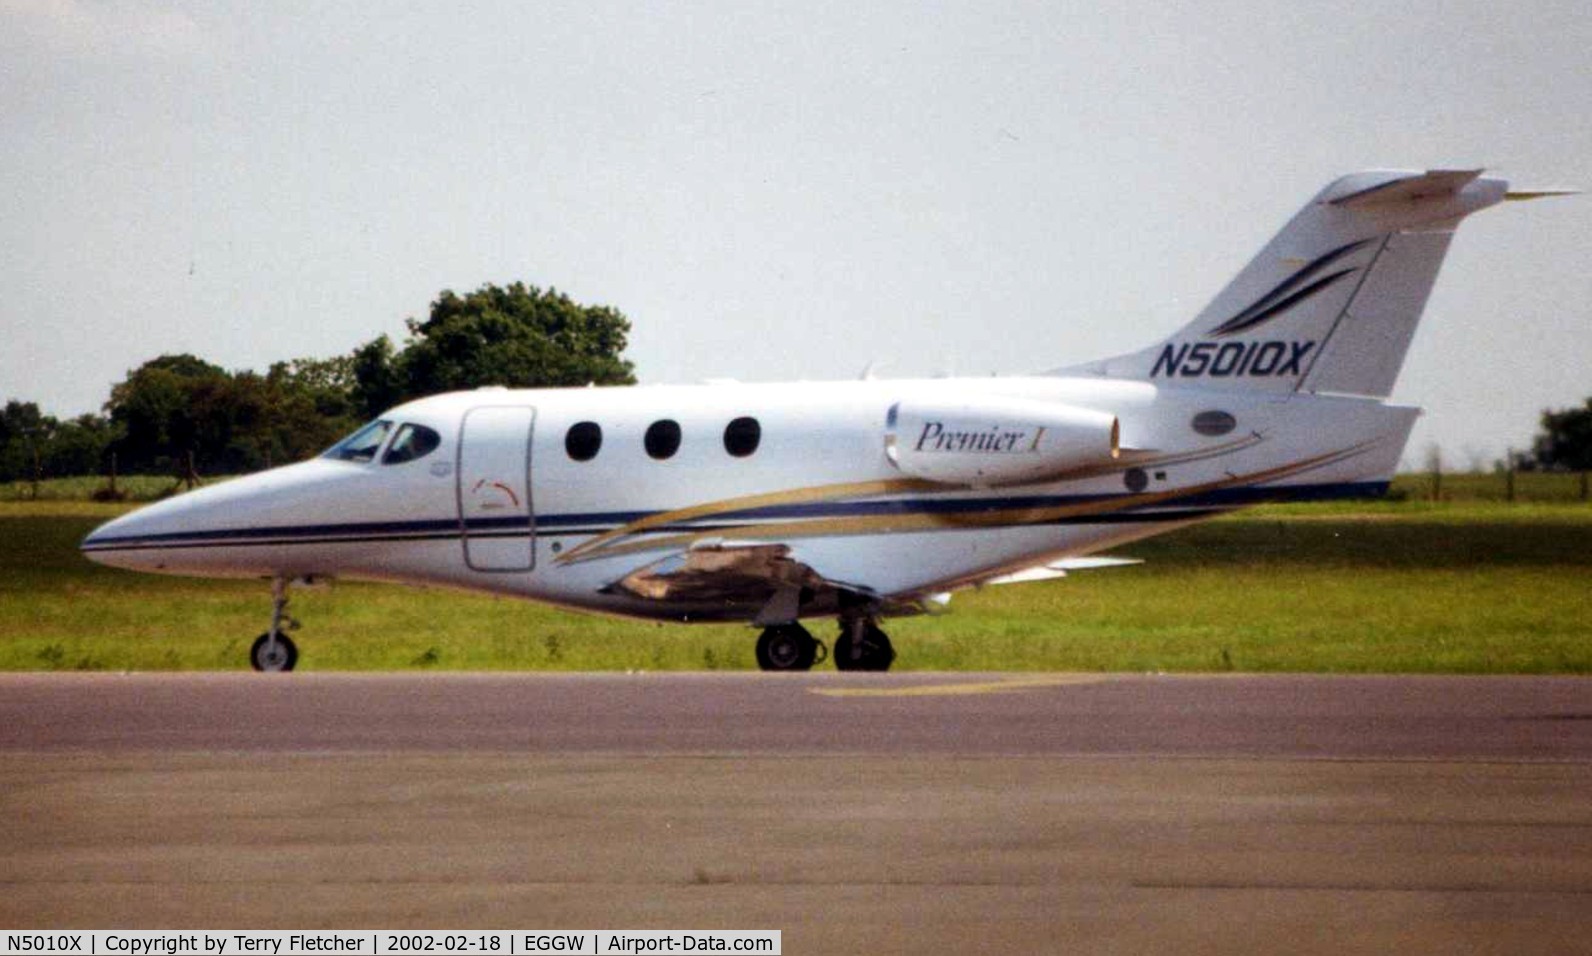 N5010X, 2001 Raytheon Aircraft Company 390 C/N RB-10, Seen here at Luton in 2002 - this aircraft was subsequently extensively damaged at North Las Vegas in 2004